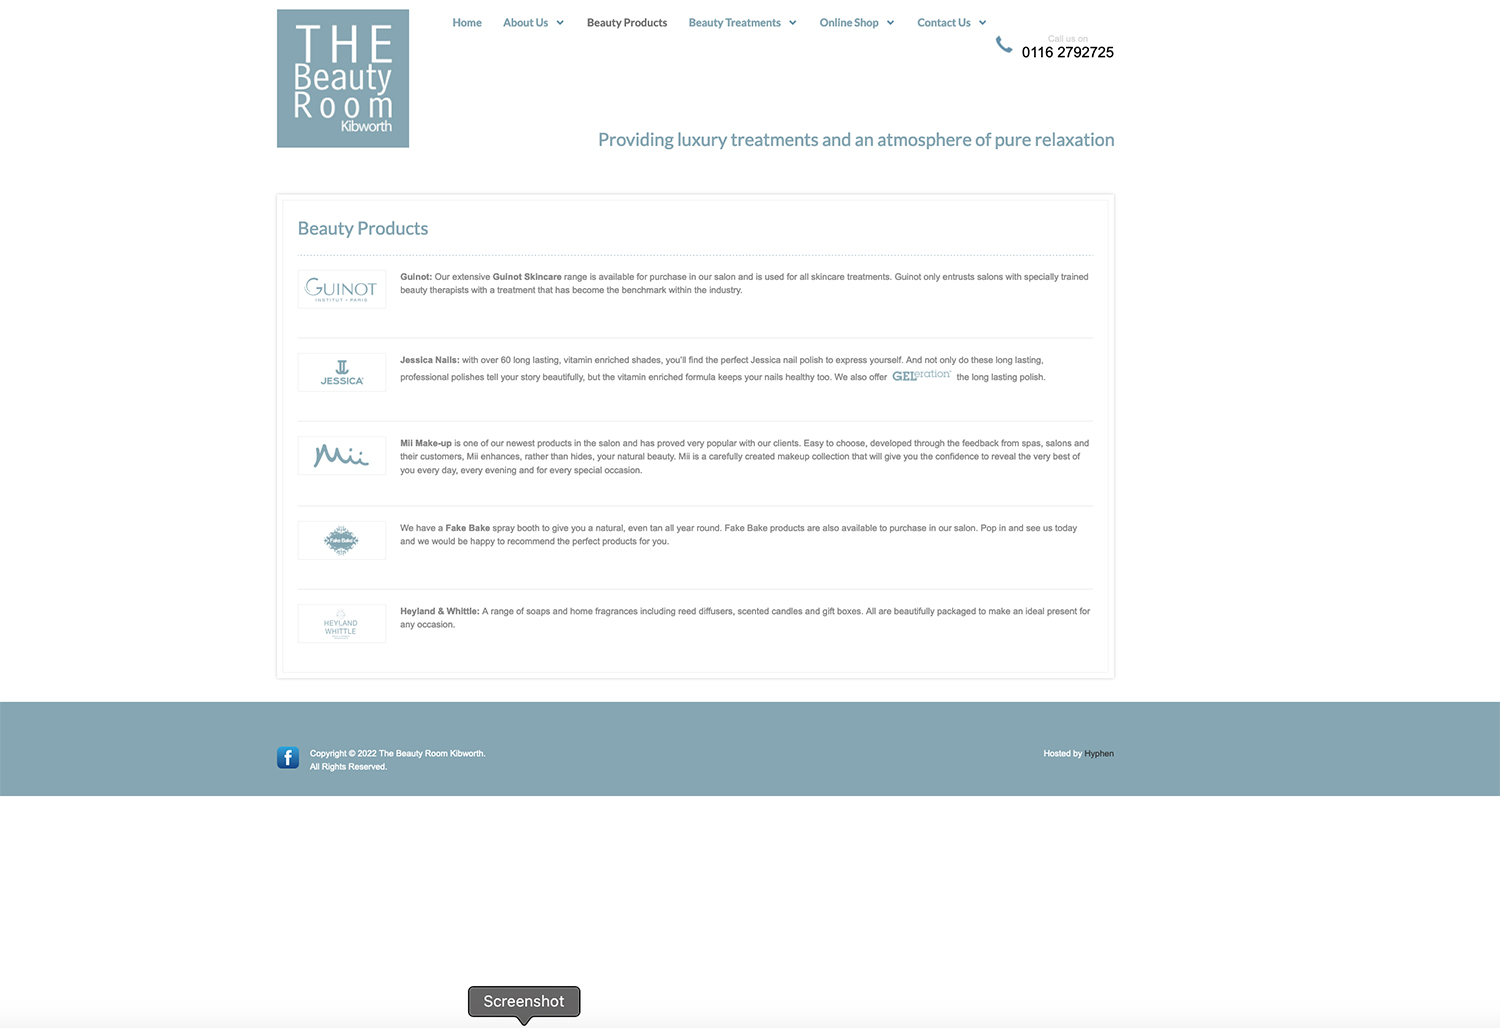 The Beauty Room New website product page, designed, built and hosted by Hyphen